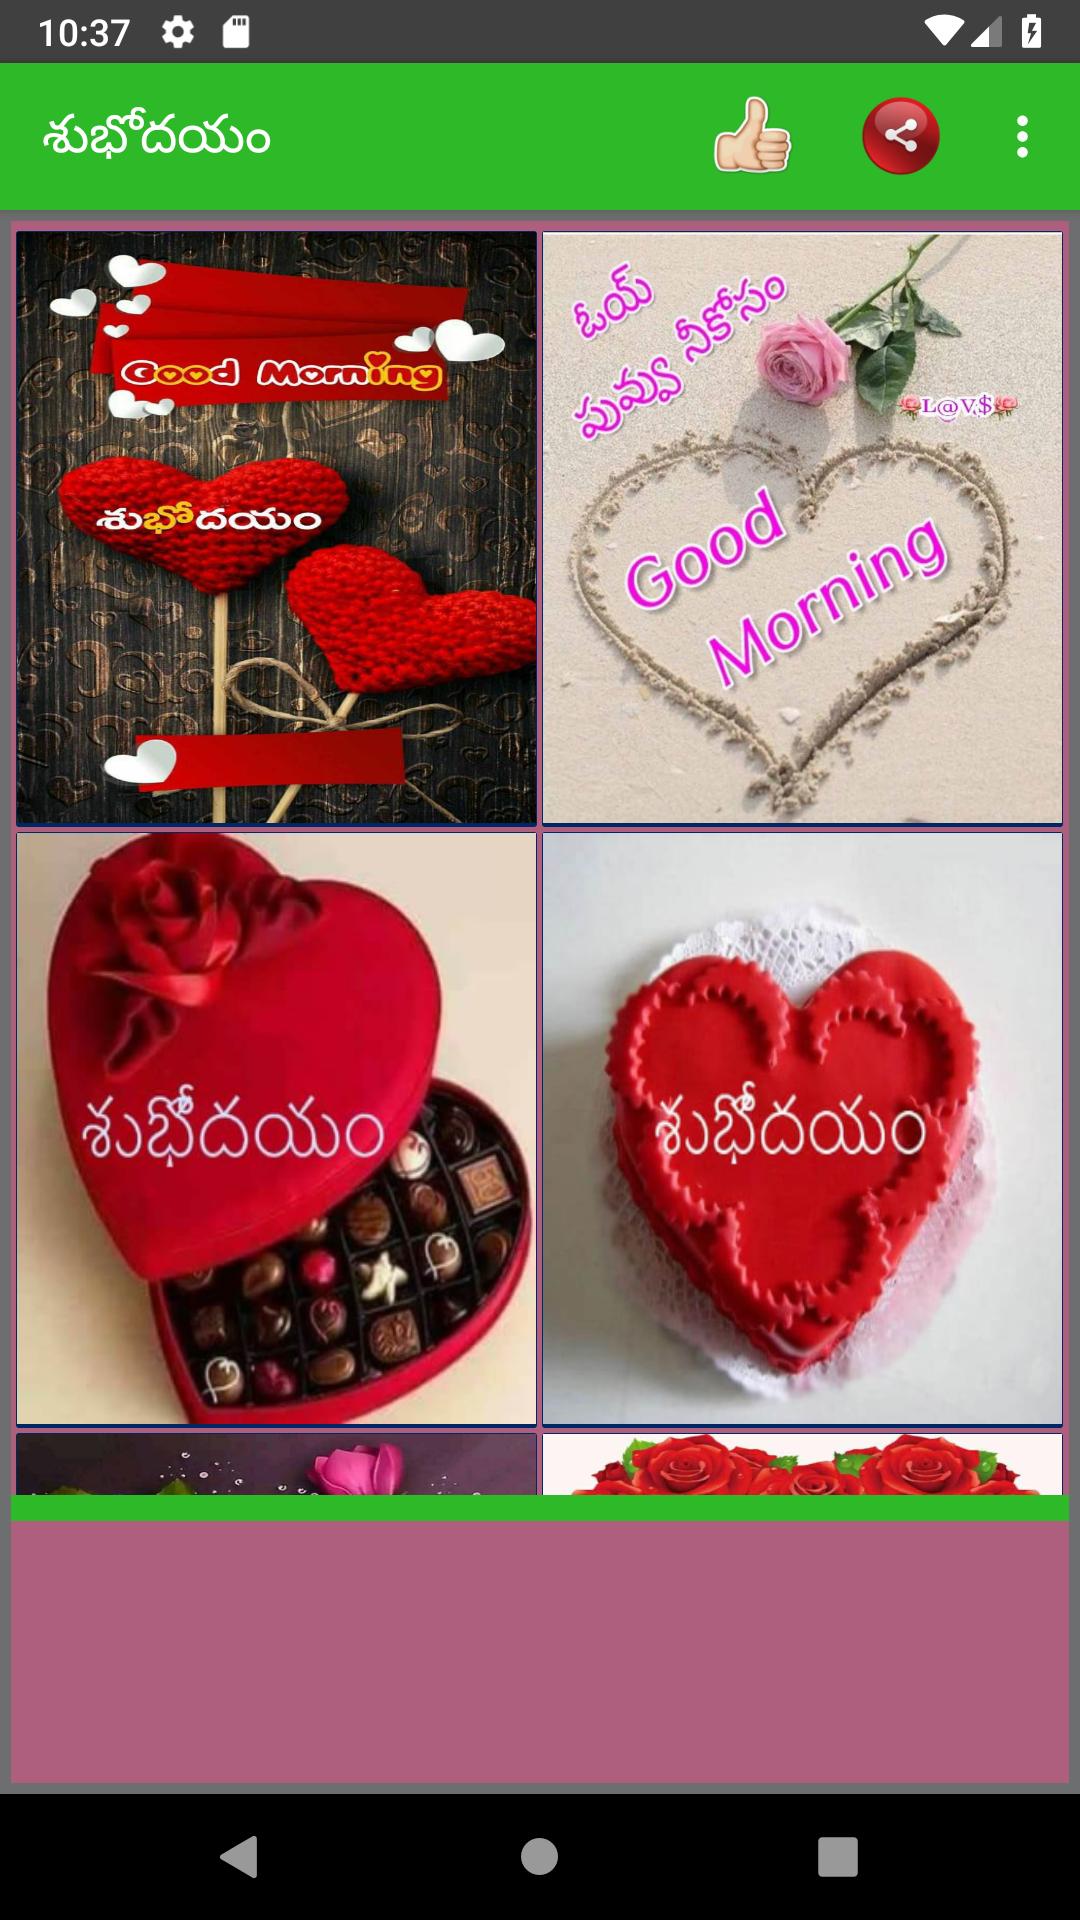 Telugu Good Morning Pictures For Android Apk Download